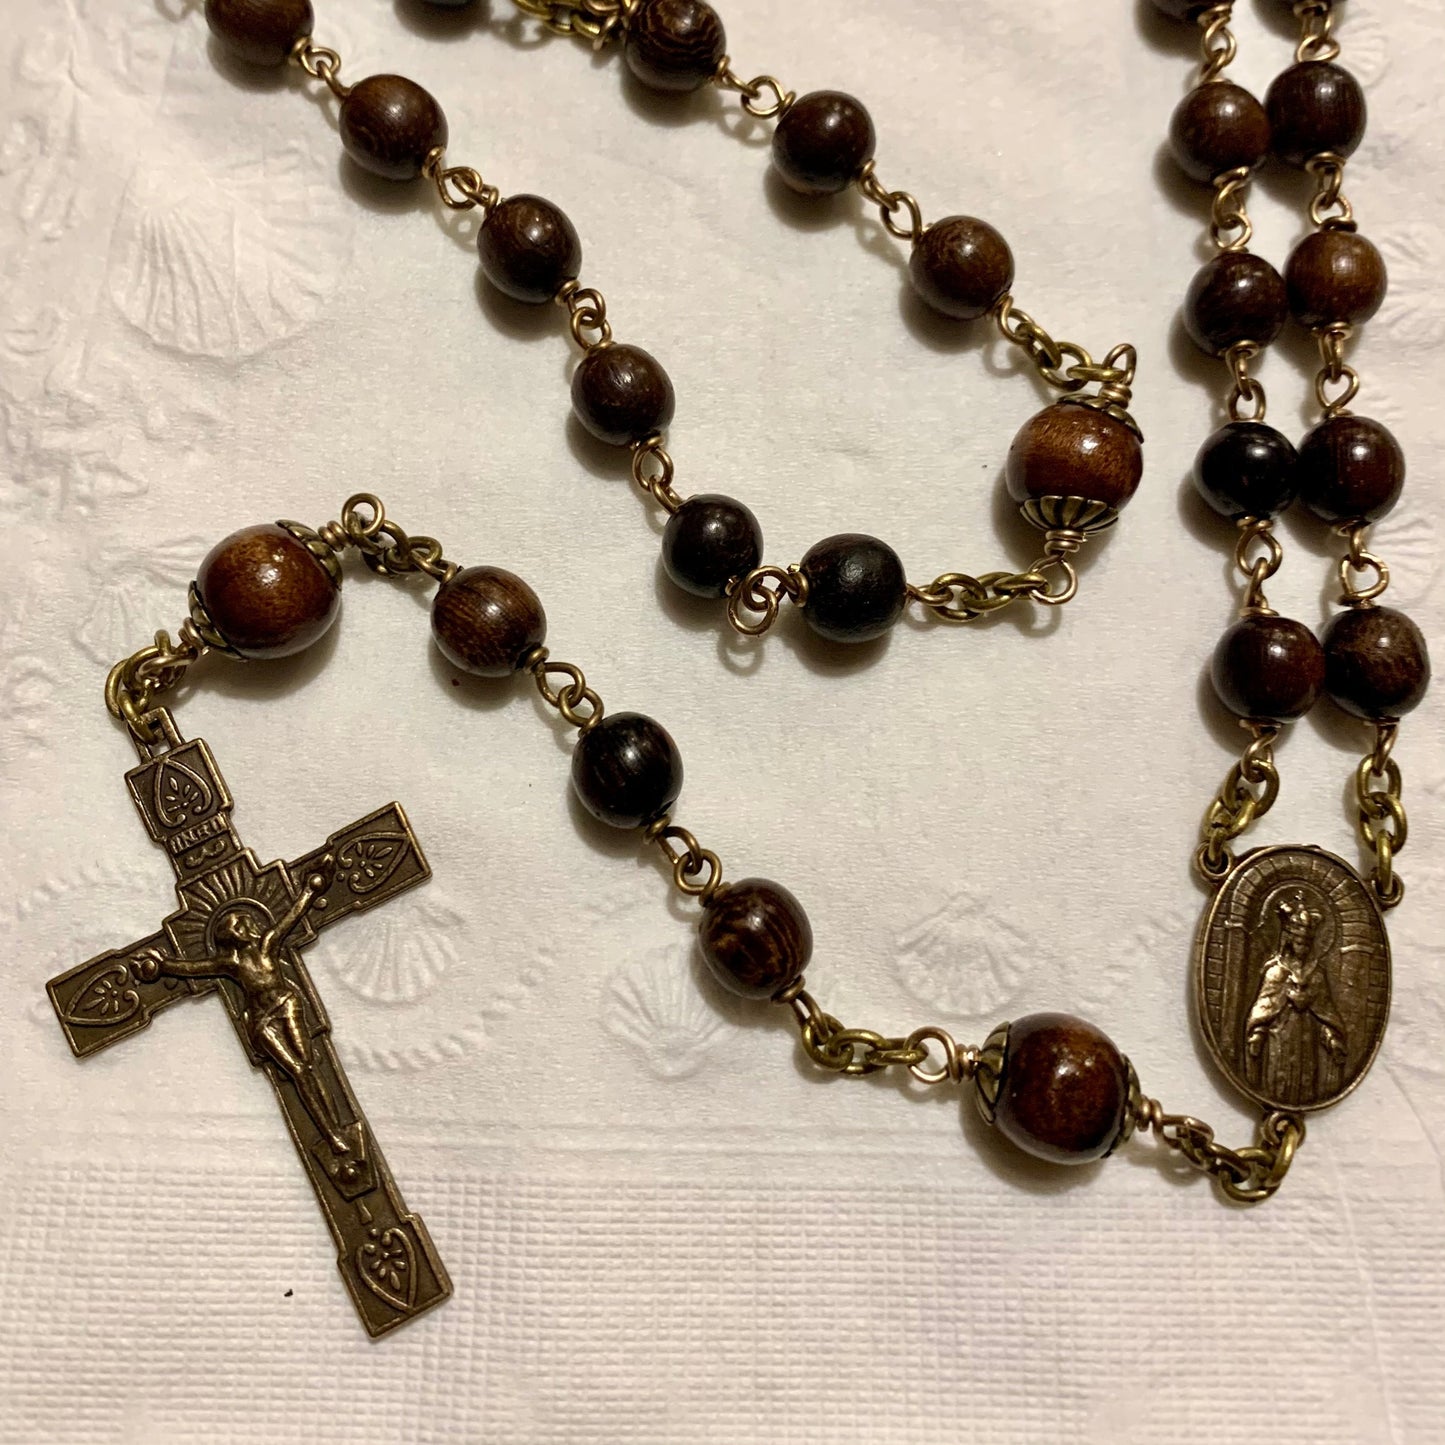 Heirloom Rosary, Rosewood beads and Bronze Square Crucifix